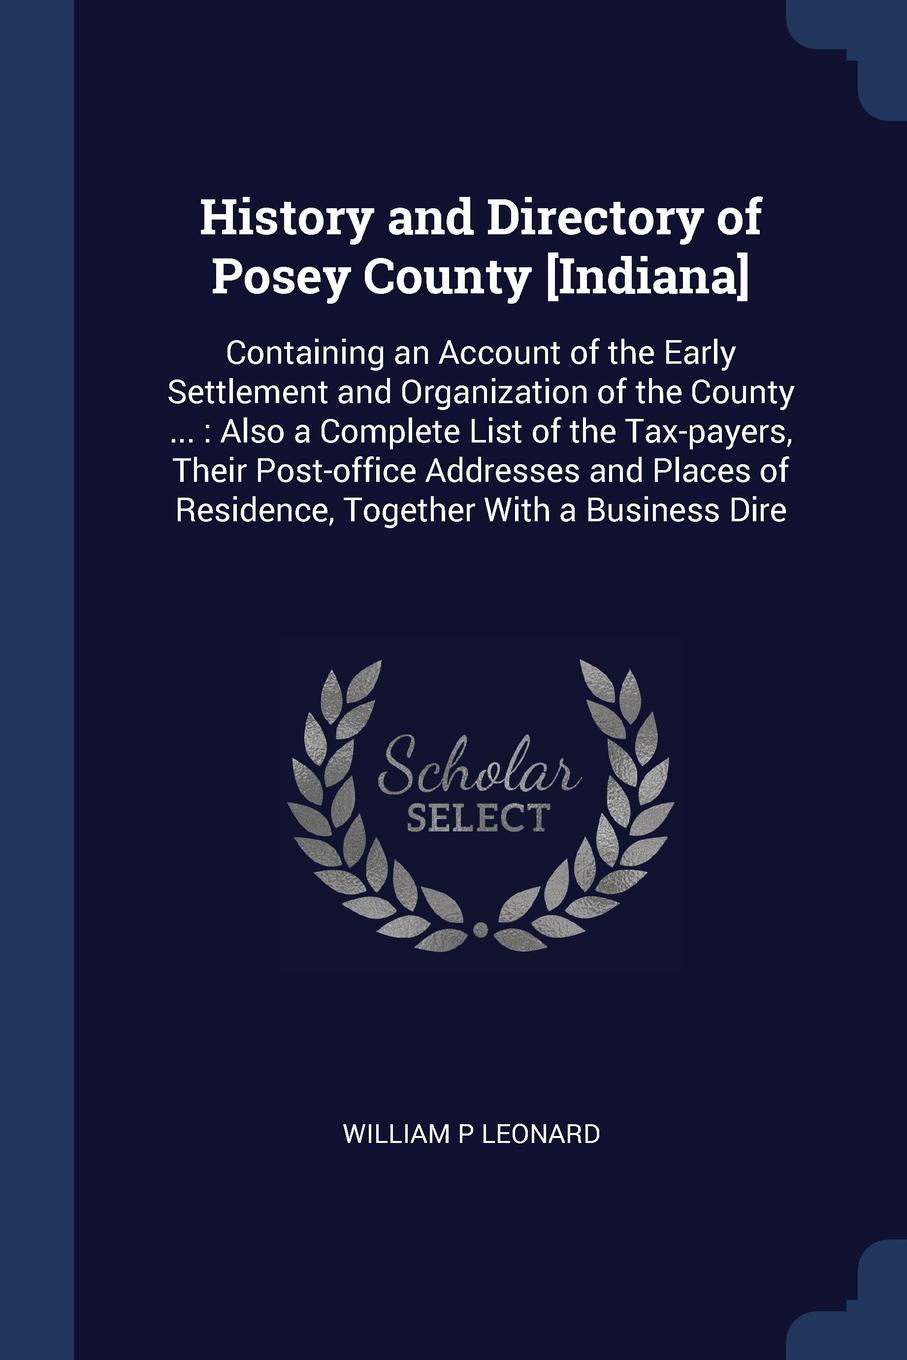 History and Directory of Posey County .Indiana.. Containing an Account of the Early Settlement and Organization of the County ... : Also a Complete List of the Tax-payers, Their Post-office Addresses and Places of Residence, Together With a Busine...